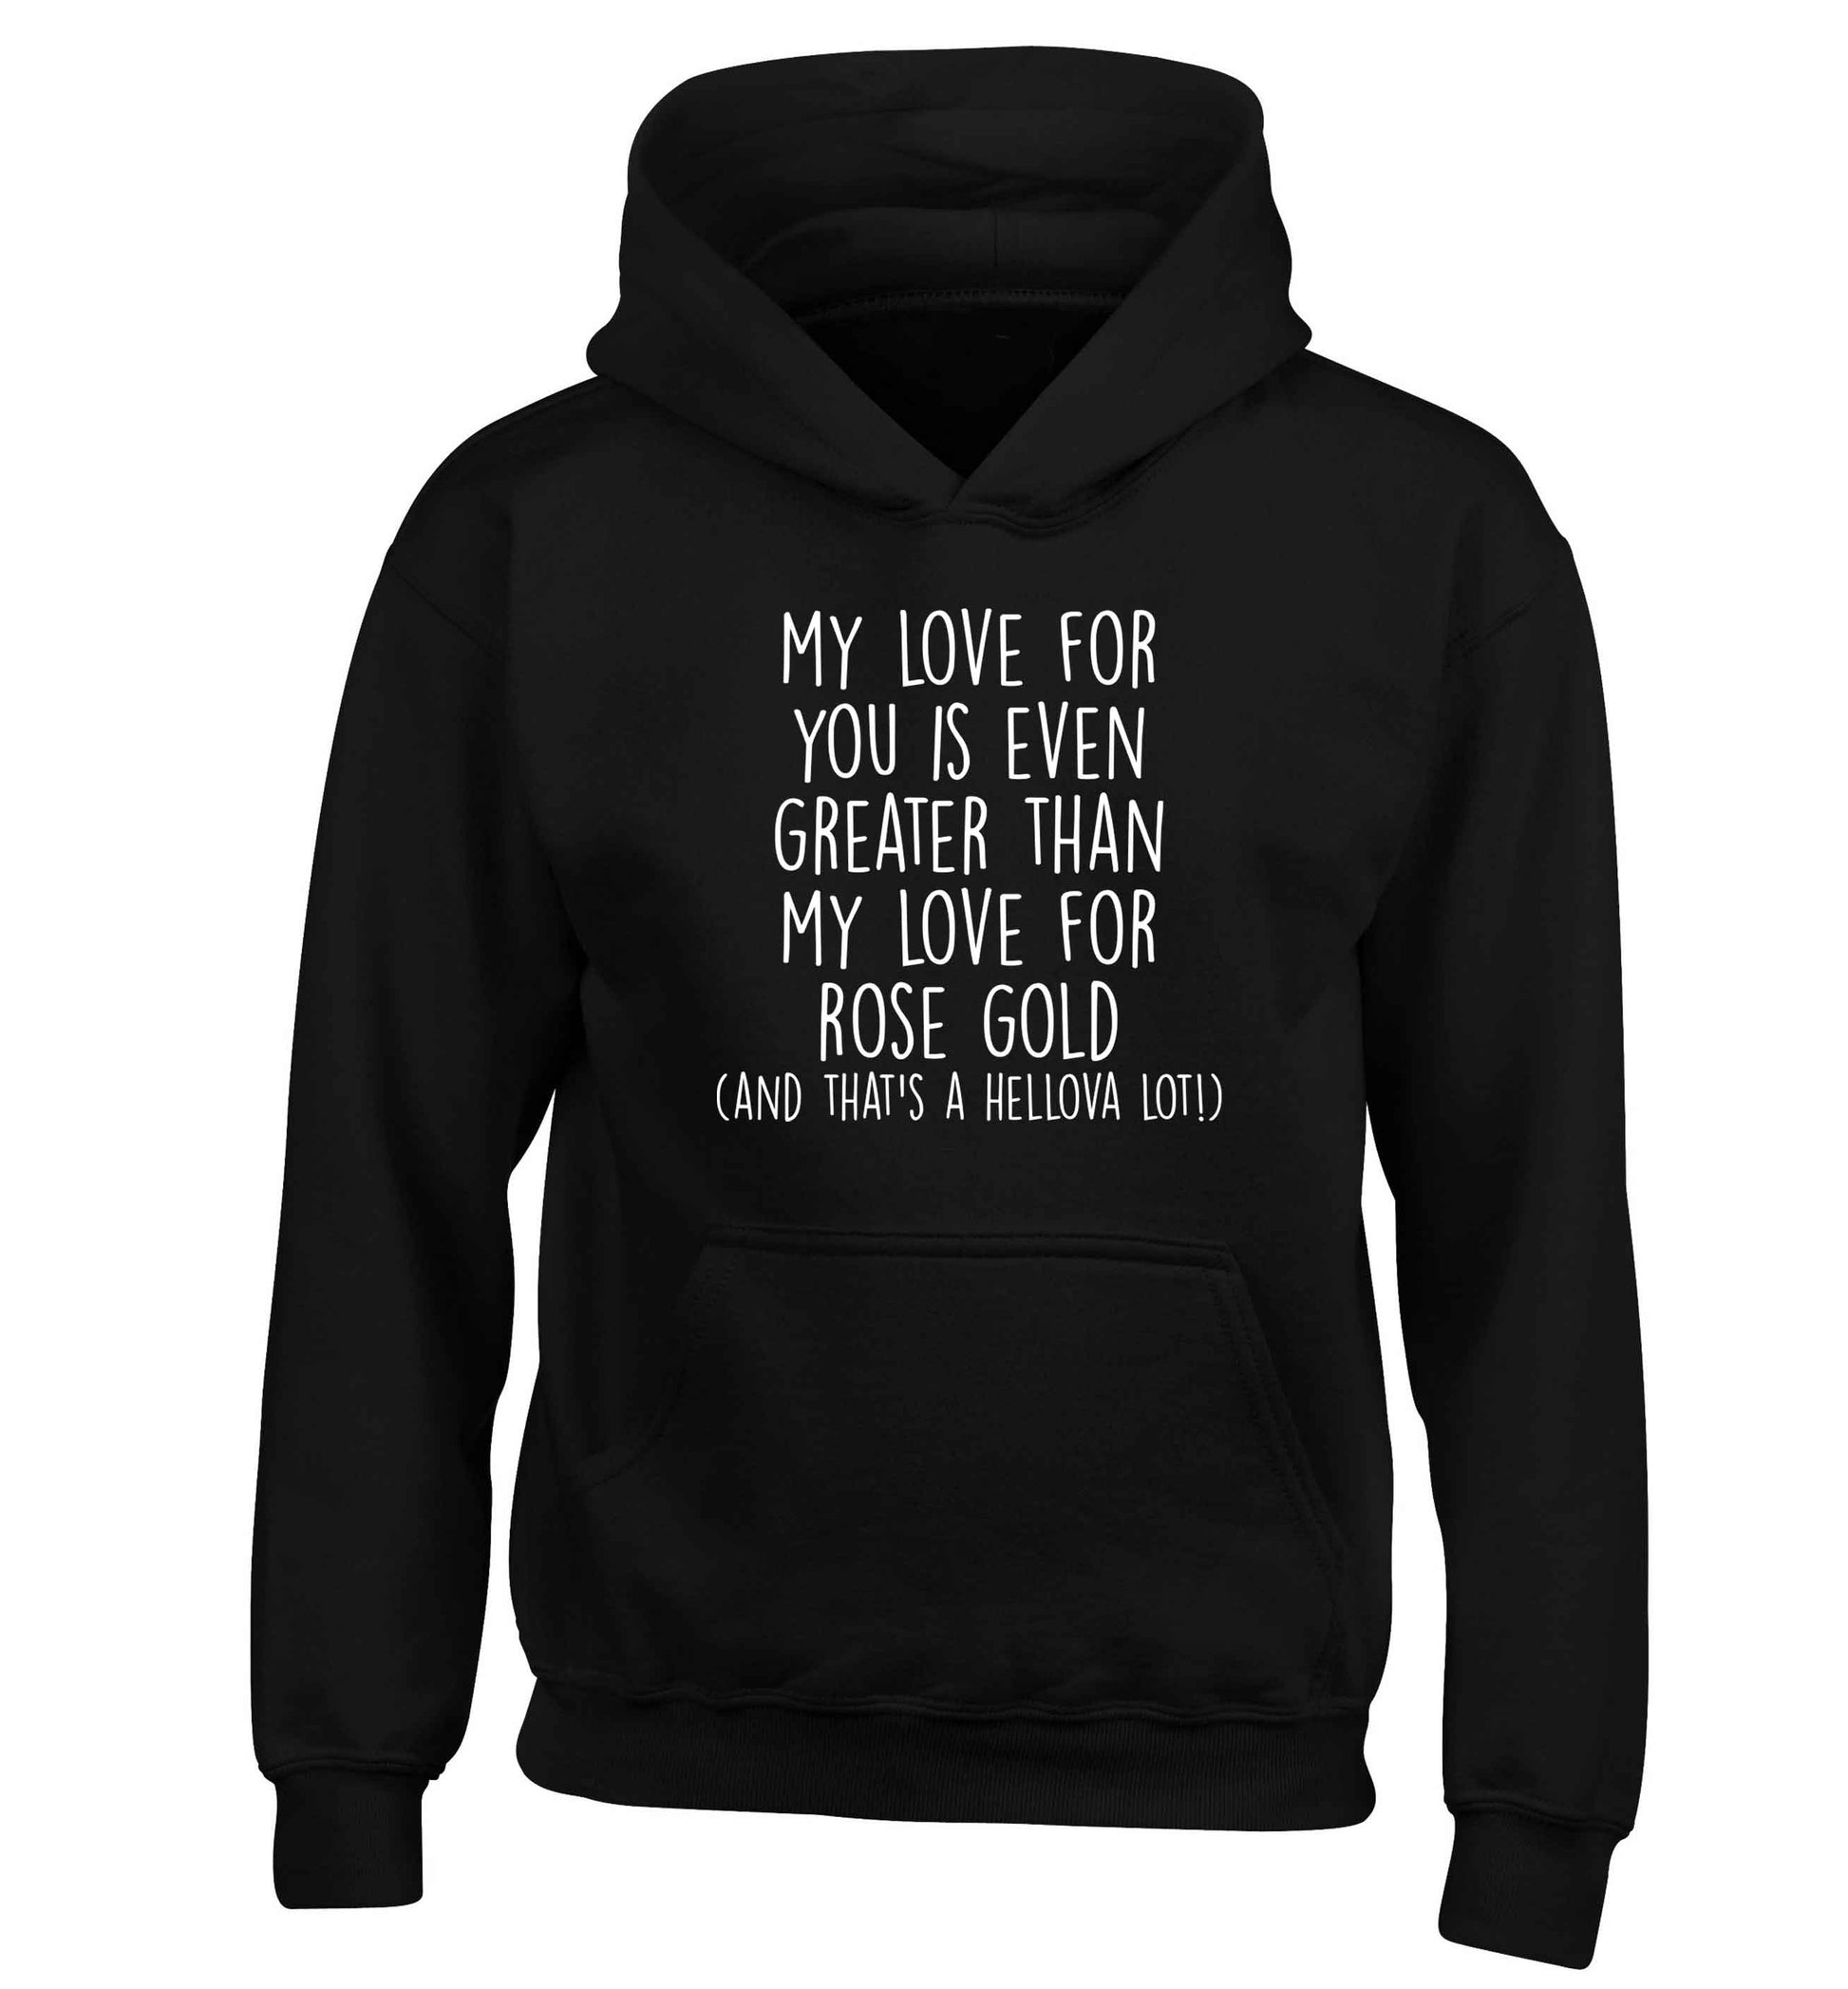 My love for you is even greater than my love for rose gold (and that's a hellova lot) children's black hoodie 12-13 Years